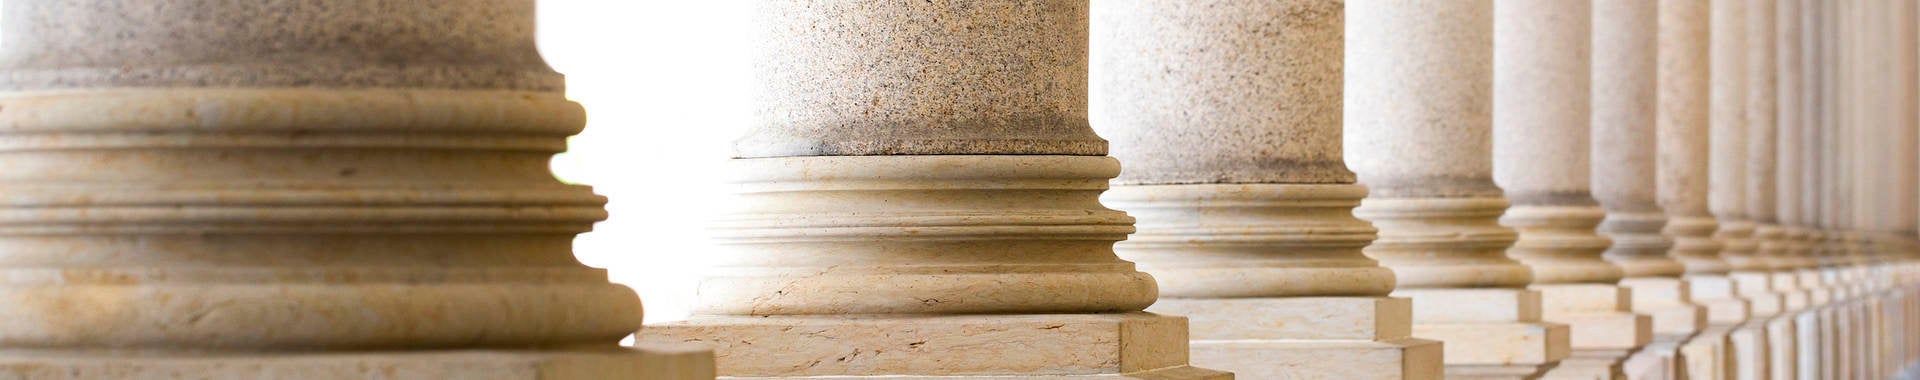 close up view of row of columns 